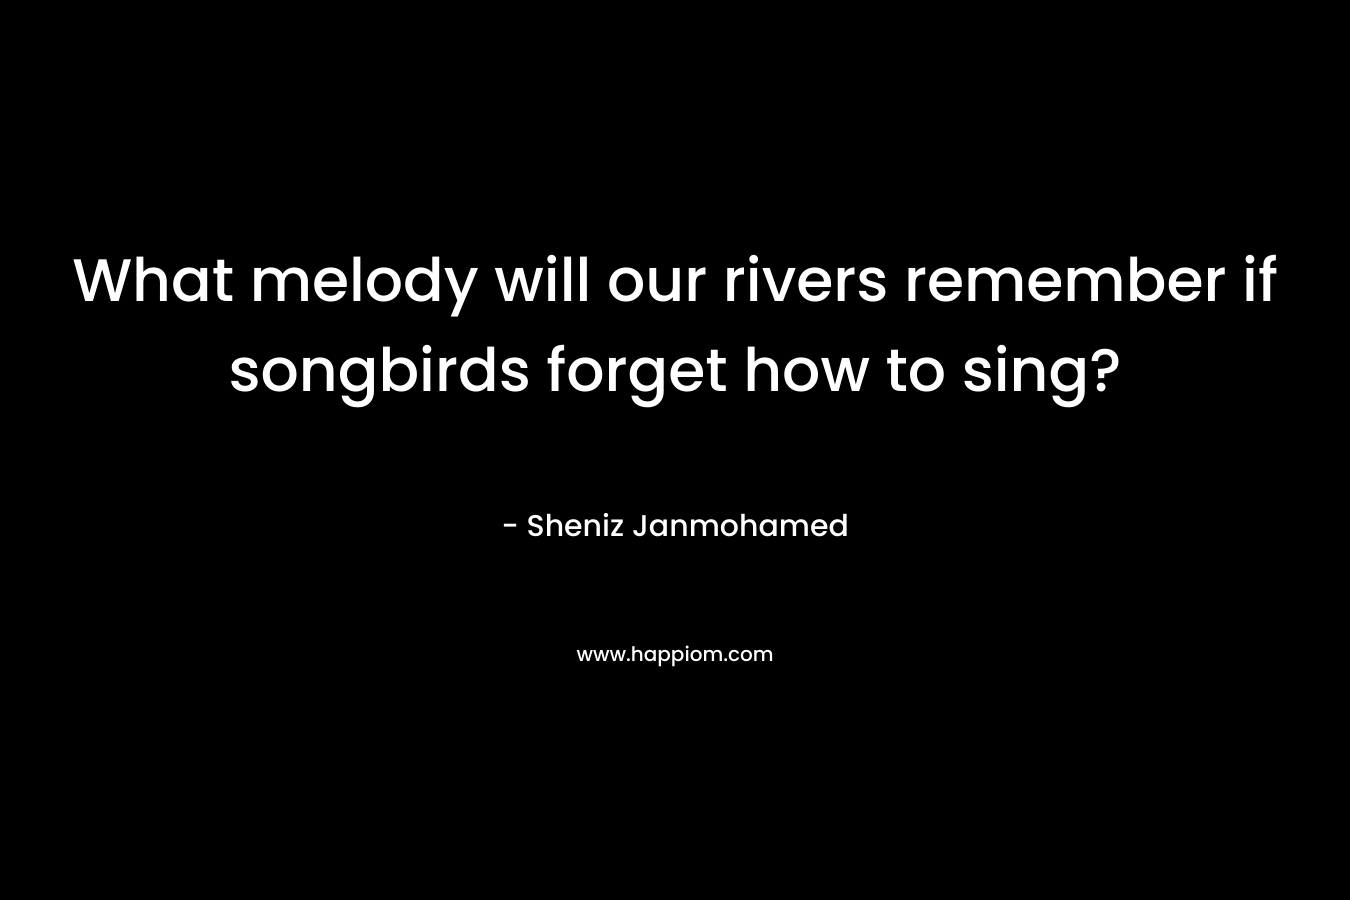 What melody will our rivers remember if songbirds forget how to sing?